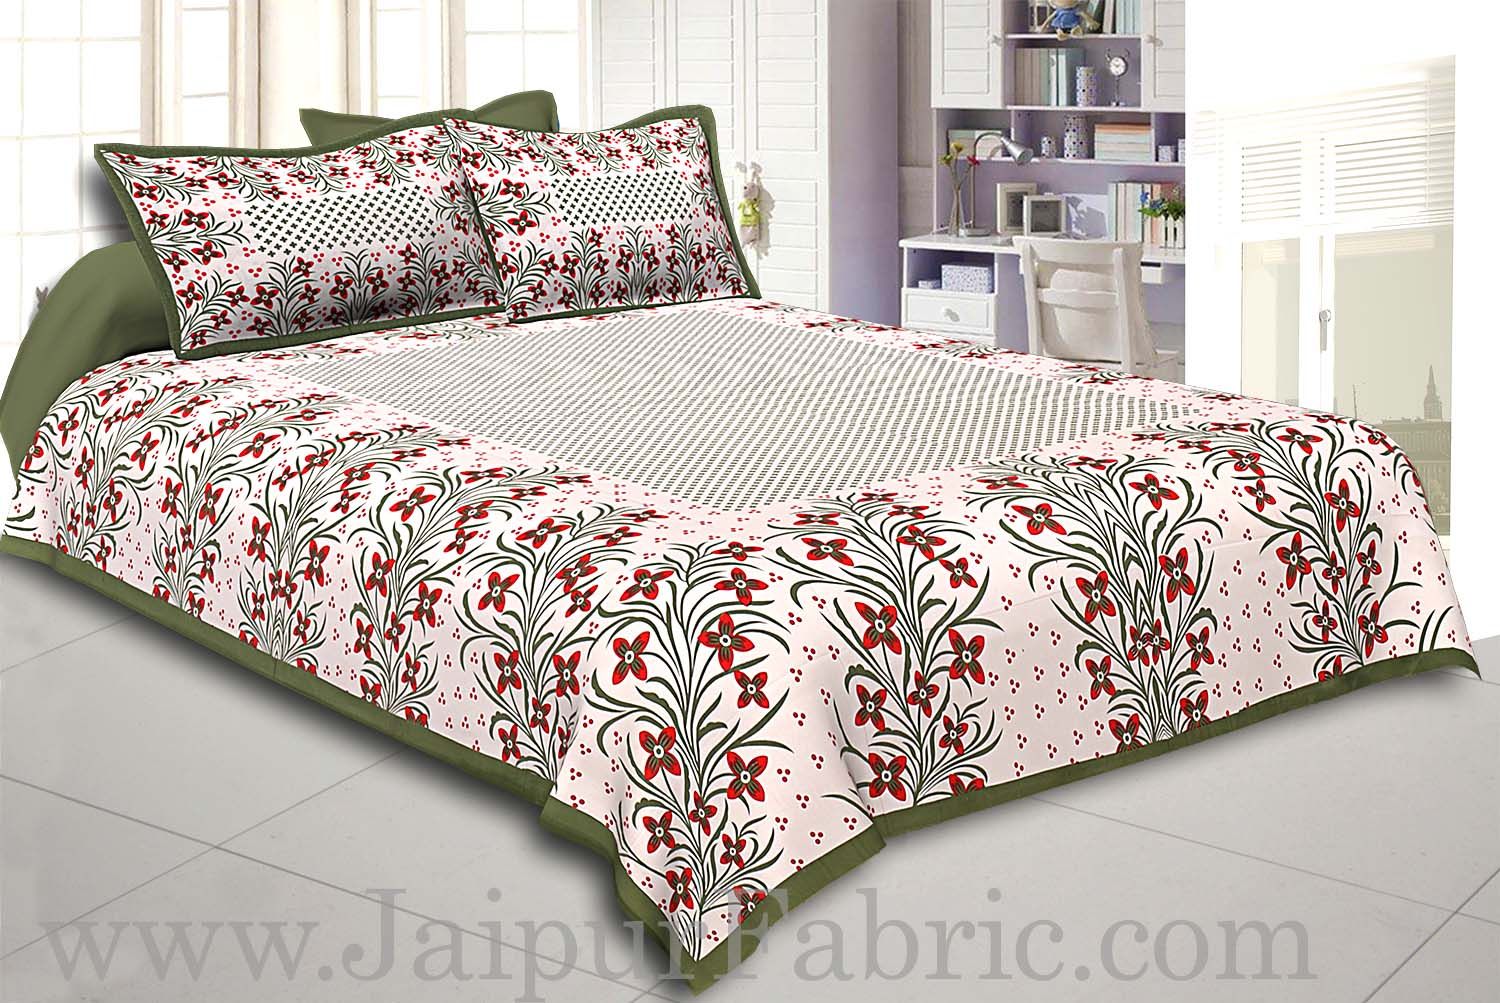 Mehndi Border White Base Red and Green Flower and Leaf Pattern Coton Double Bedsheet